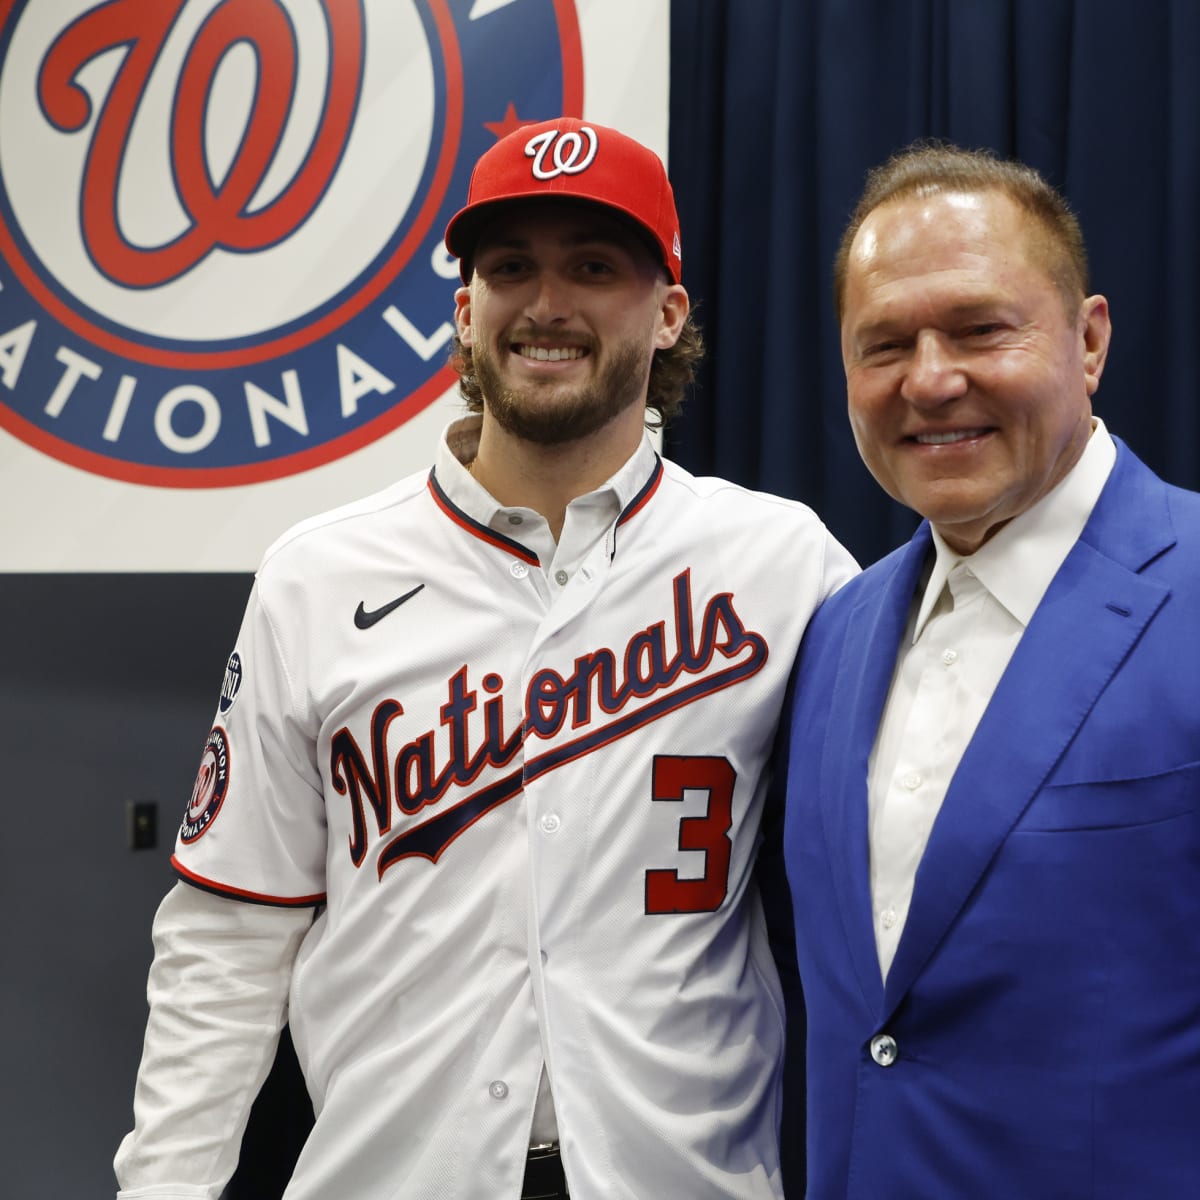 Washington Nationals Top Prospect Tearing Up Minor Leagues After Being  Drafted No. 2 Overall - Fastball